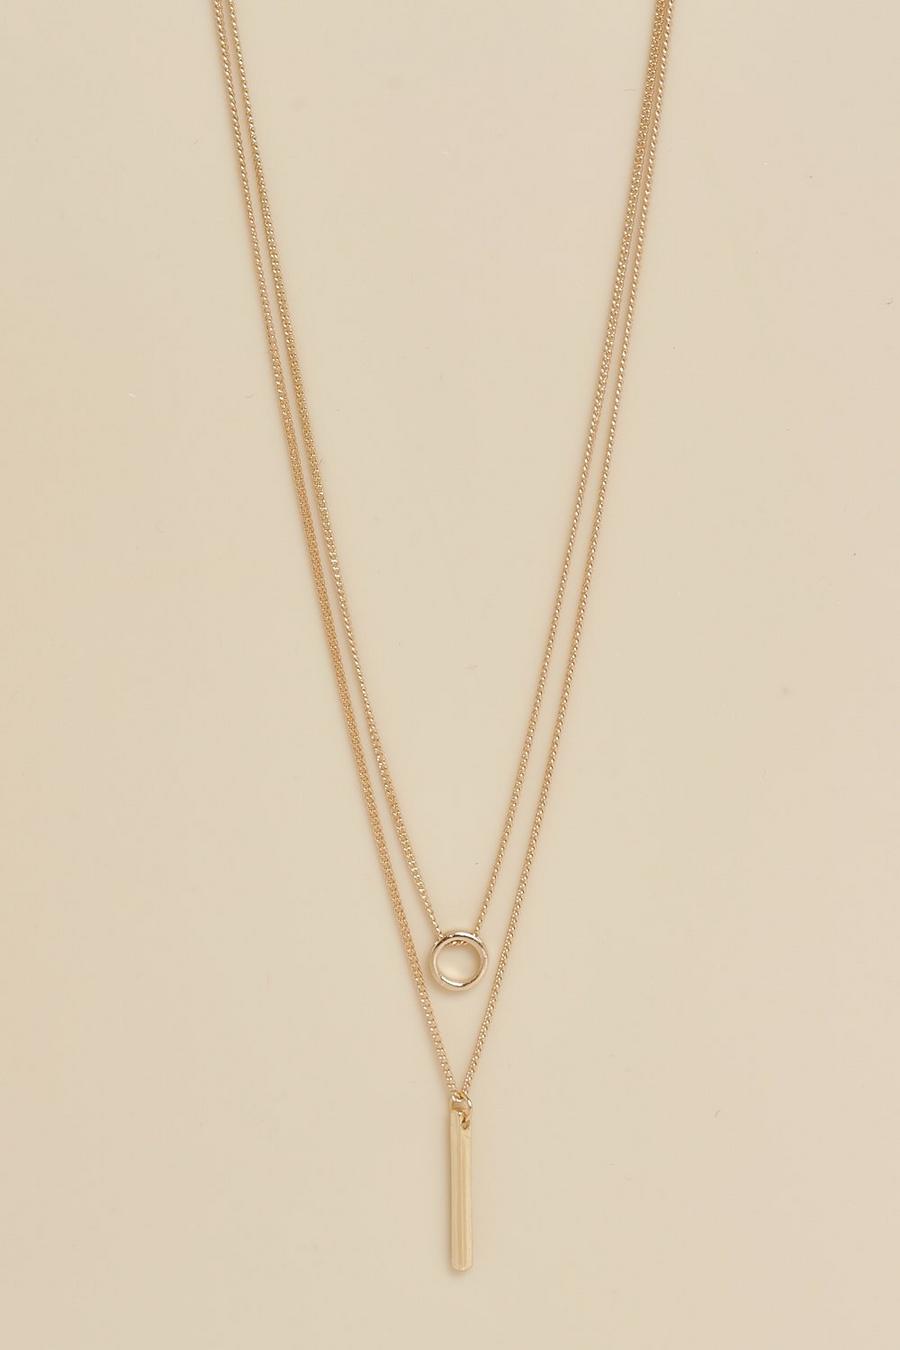 Gold Recycled Circle & Bar Simple Layered Necklace